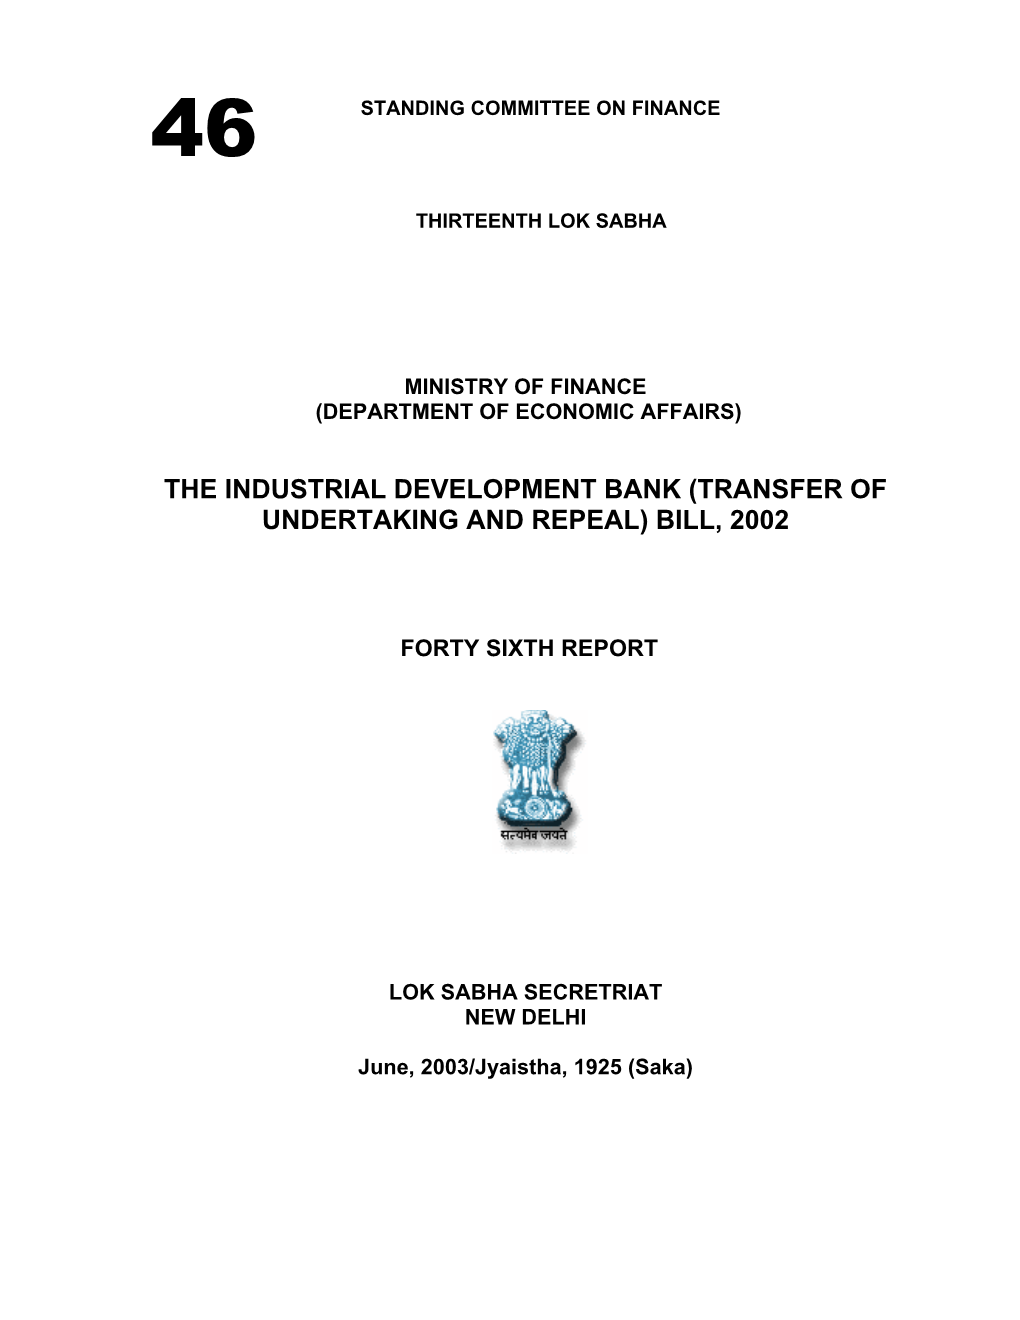 The Industrial Development Bank (Transfer of Undertaking and Repeal) Bill, 2002